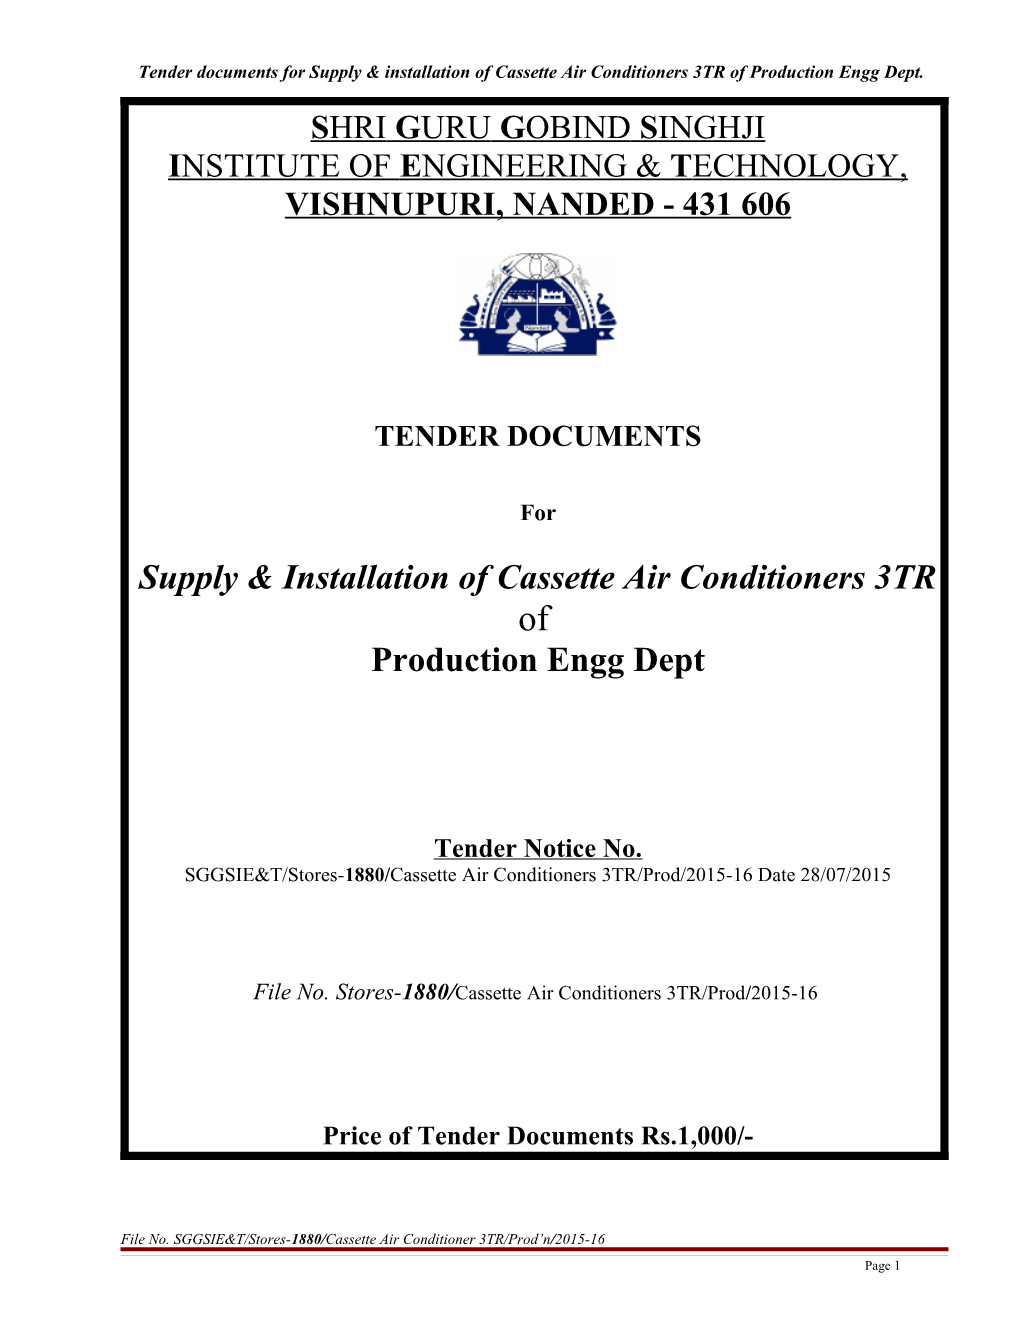 Tender Documents for Supply & Installation of Cassette Air Conditioners 3TR Ofproduction